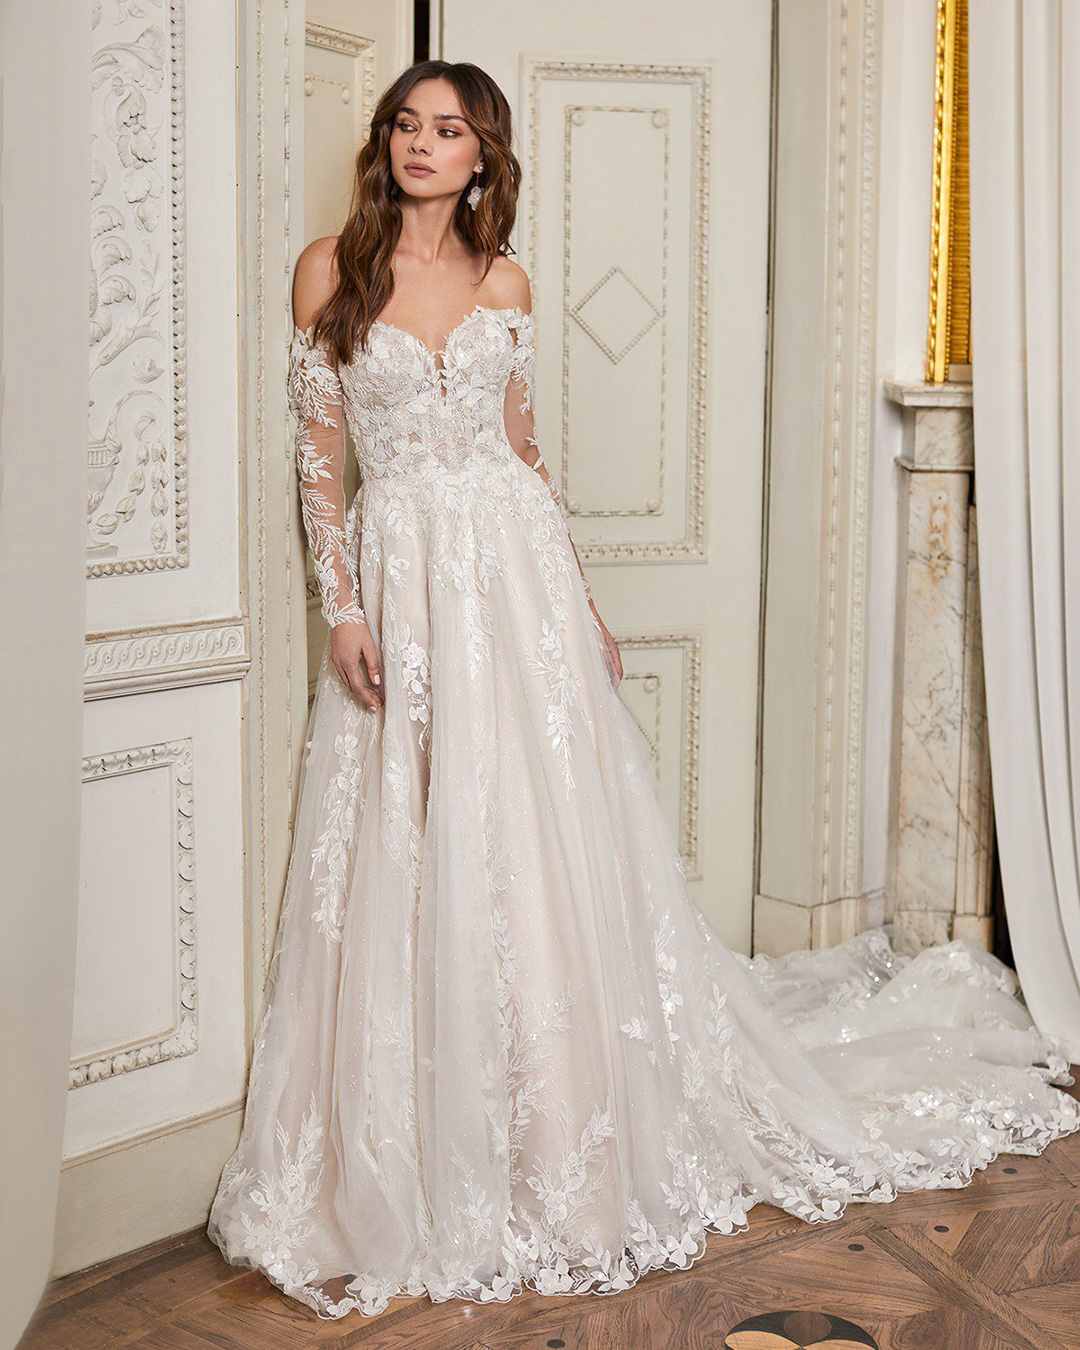 off the shoulder wedding dresses lace a line with sleeves val stefani